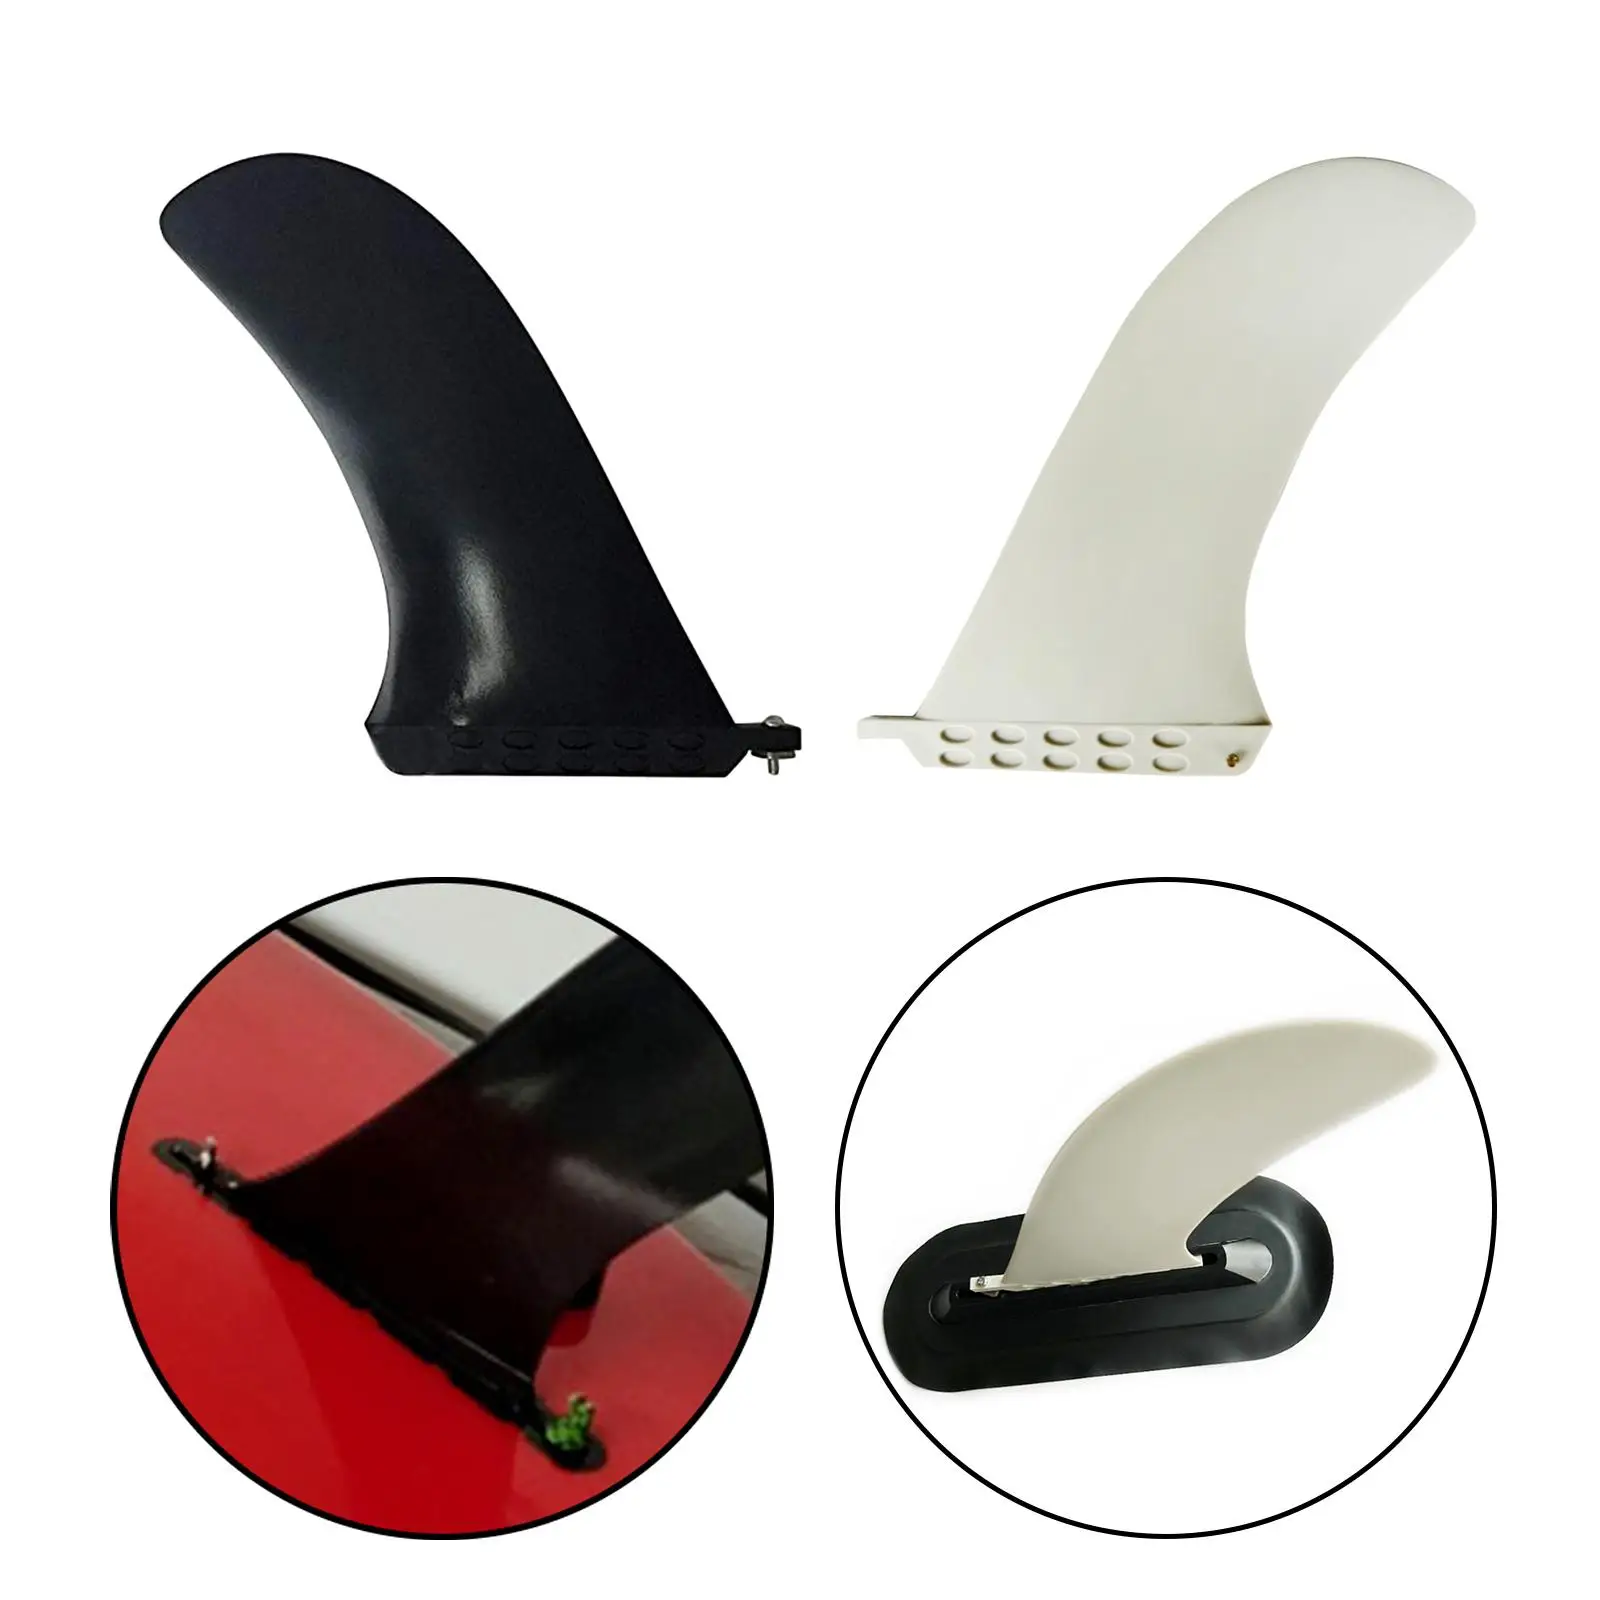 Surfboard Fins Soft Top Detachable Easy to Install Single Fin for Beach Stand up Paddle Boards Cruiser Deck Water Sports Surfing